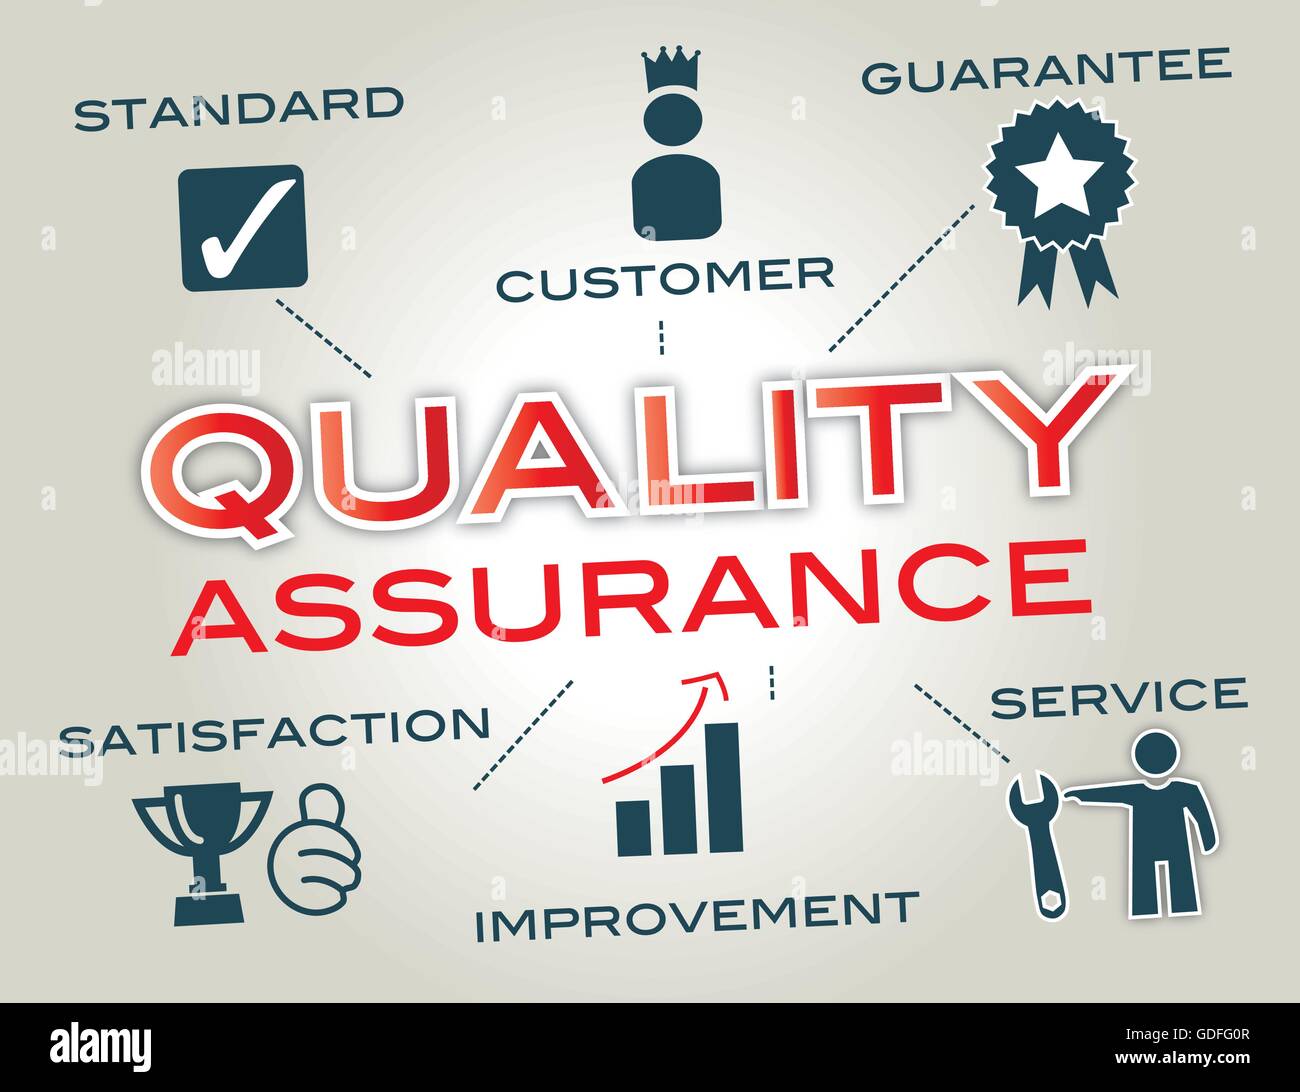 quality assurance- Infographic with Keywords and icons Stock Vector